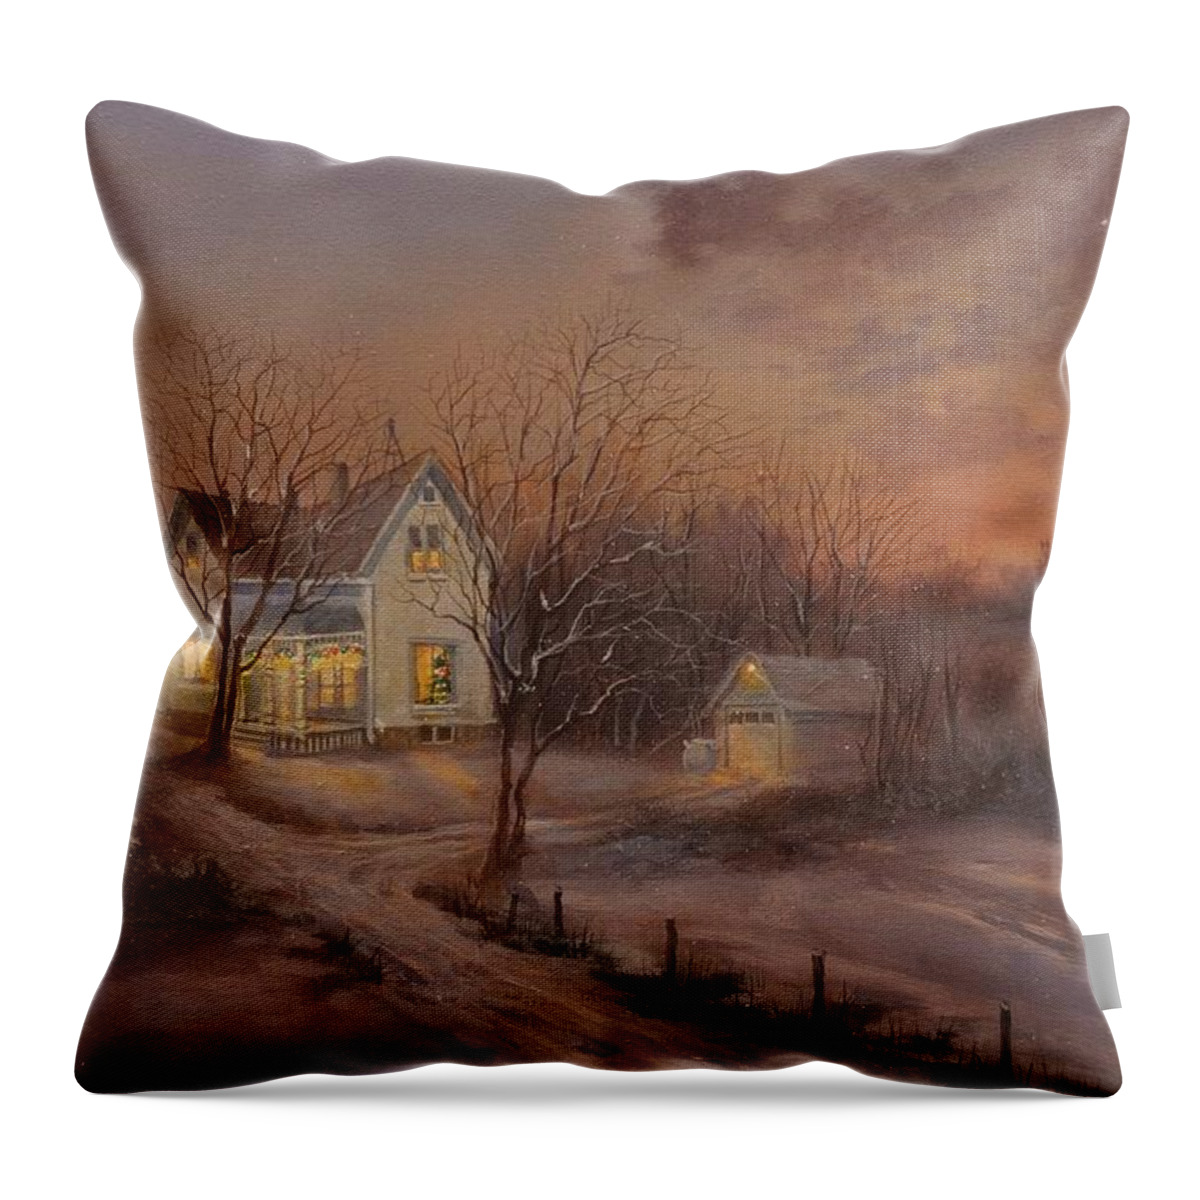  Christmas Throw Pillow featuring the painting Christmas at the Farm by Tom Shropshire